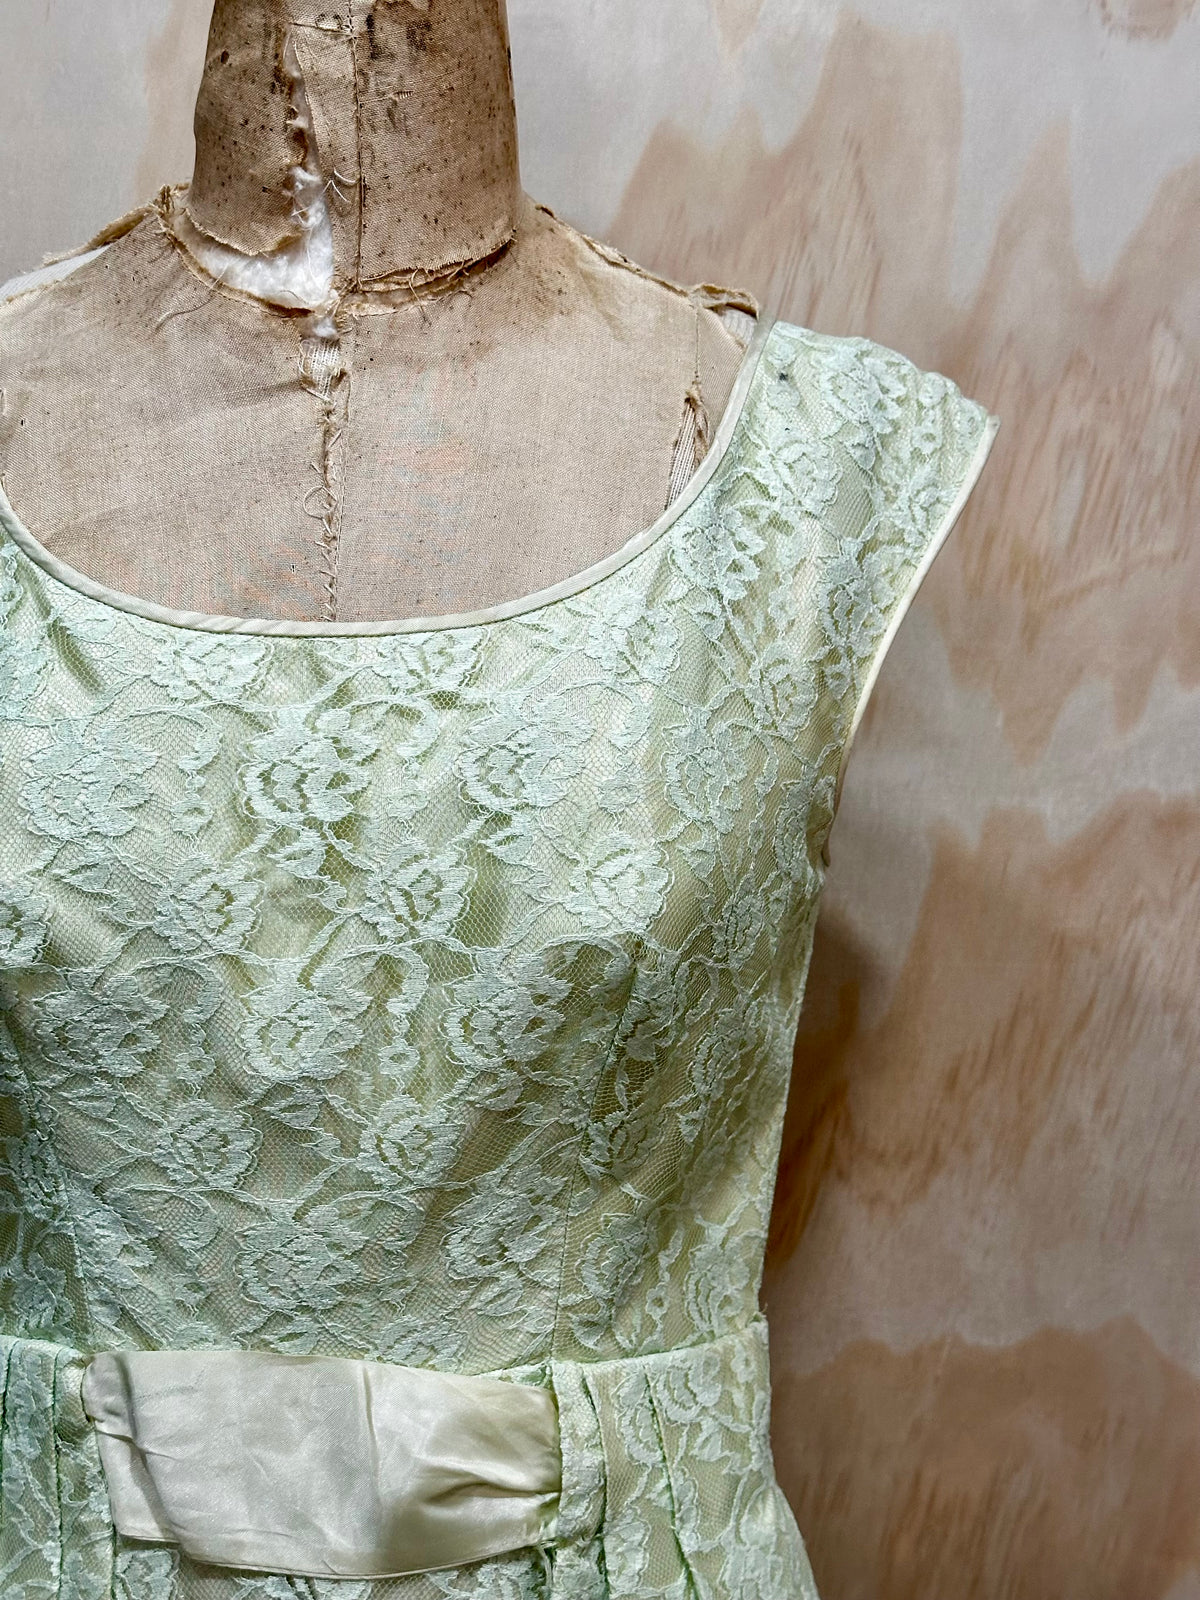 Vintage 1960's Lime Floral Evening Gown